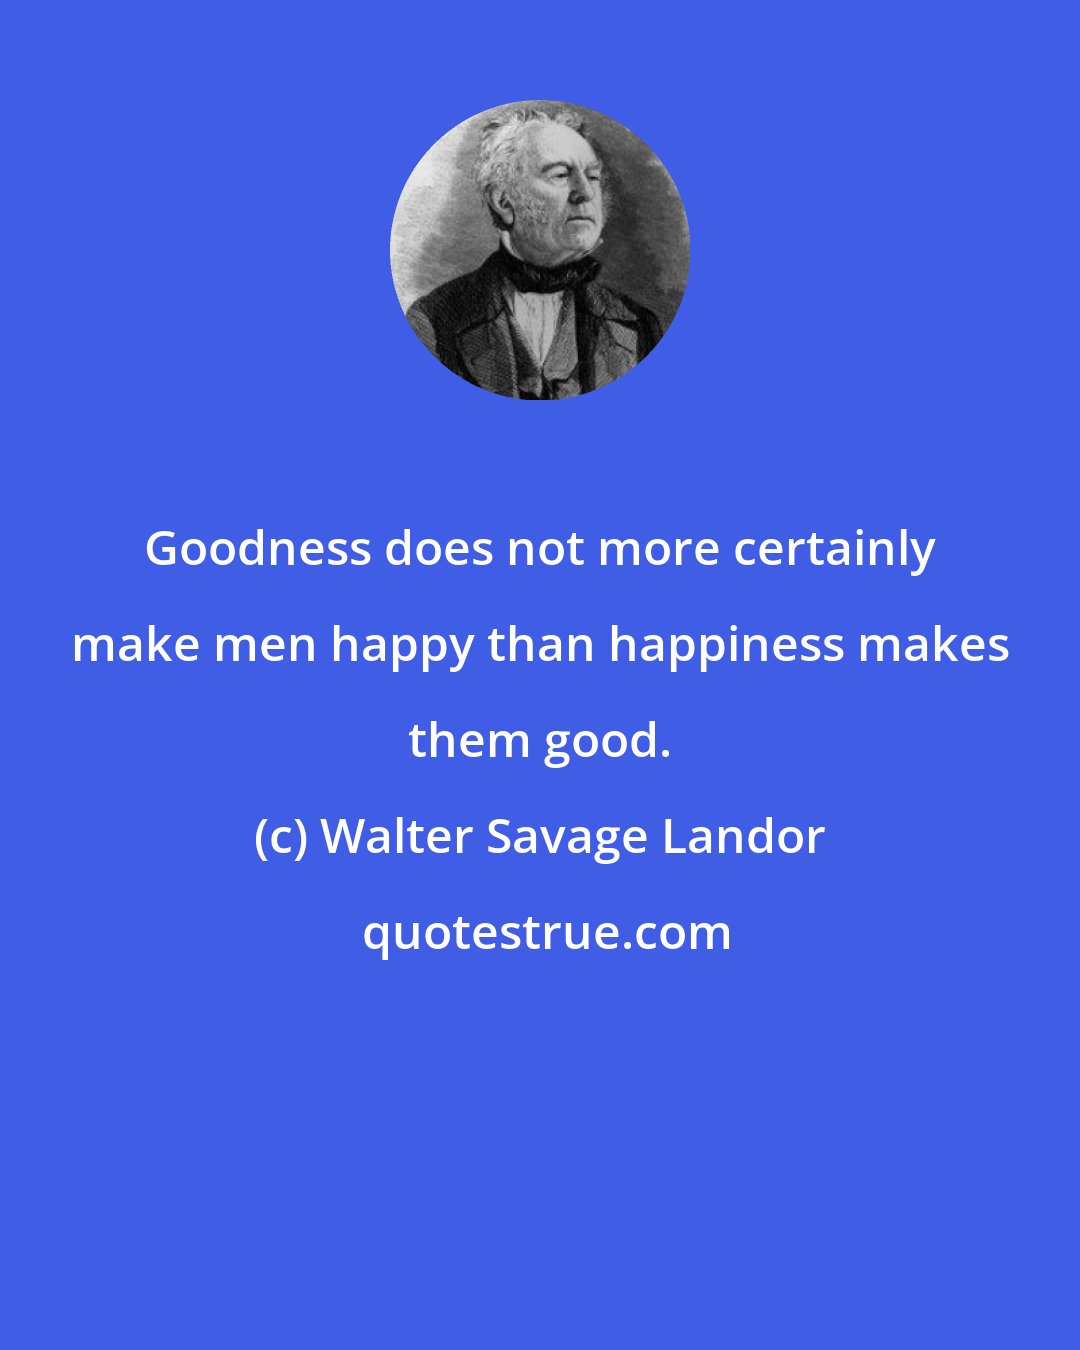 Walter Savage Landor: Goodness does not more certainly make men happy than happiness makes them good.